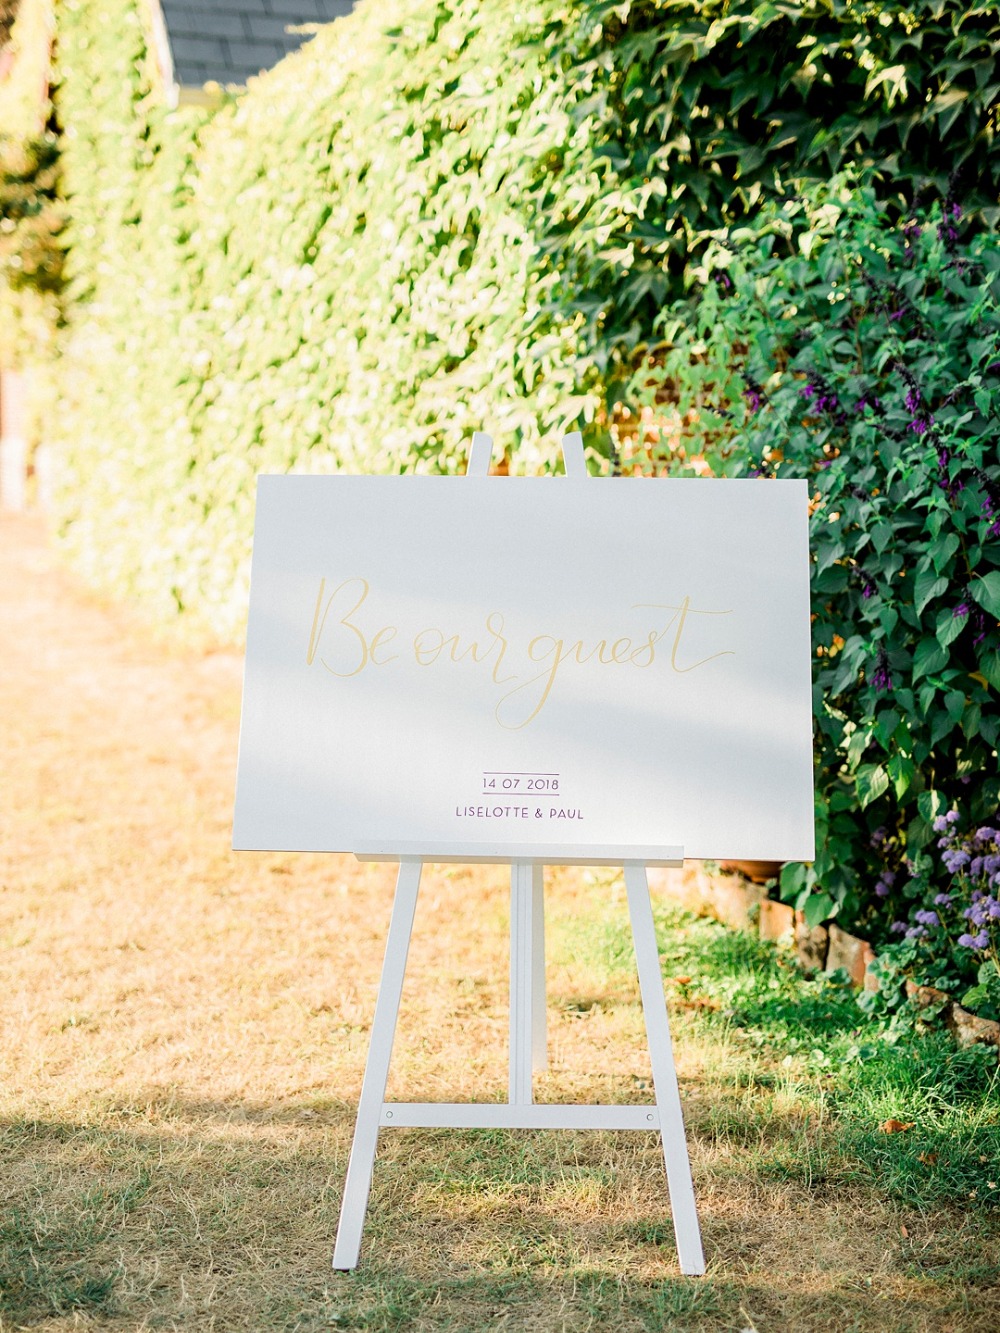 'Be our guest' wedding sign